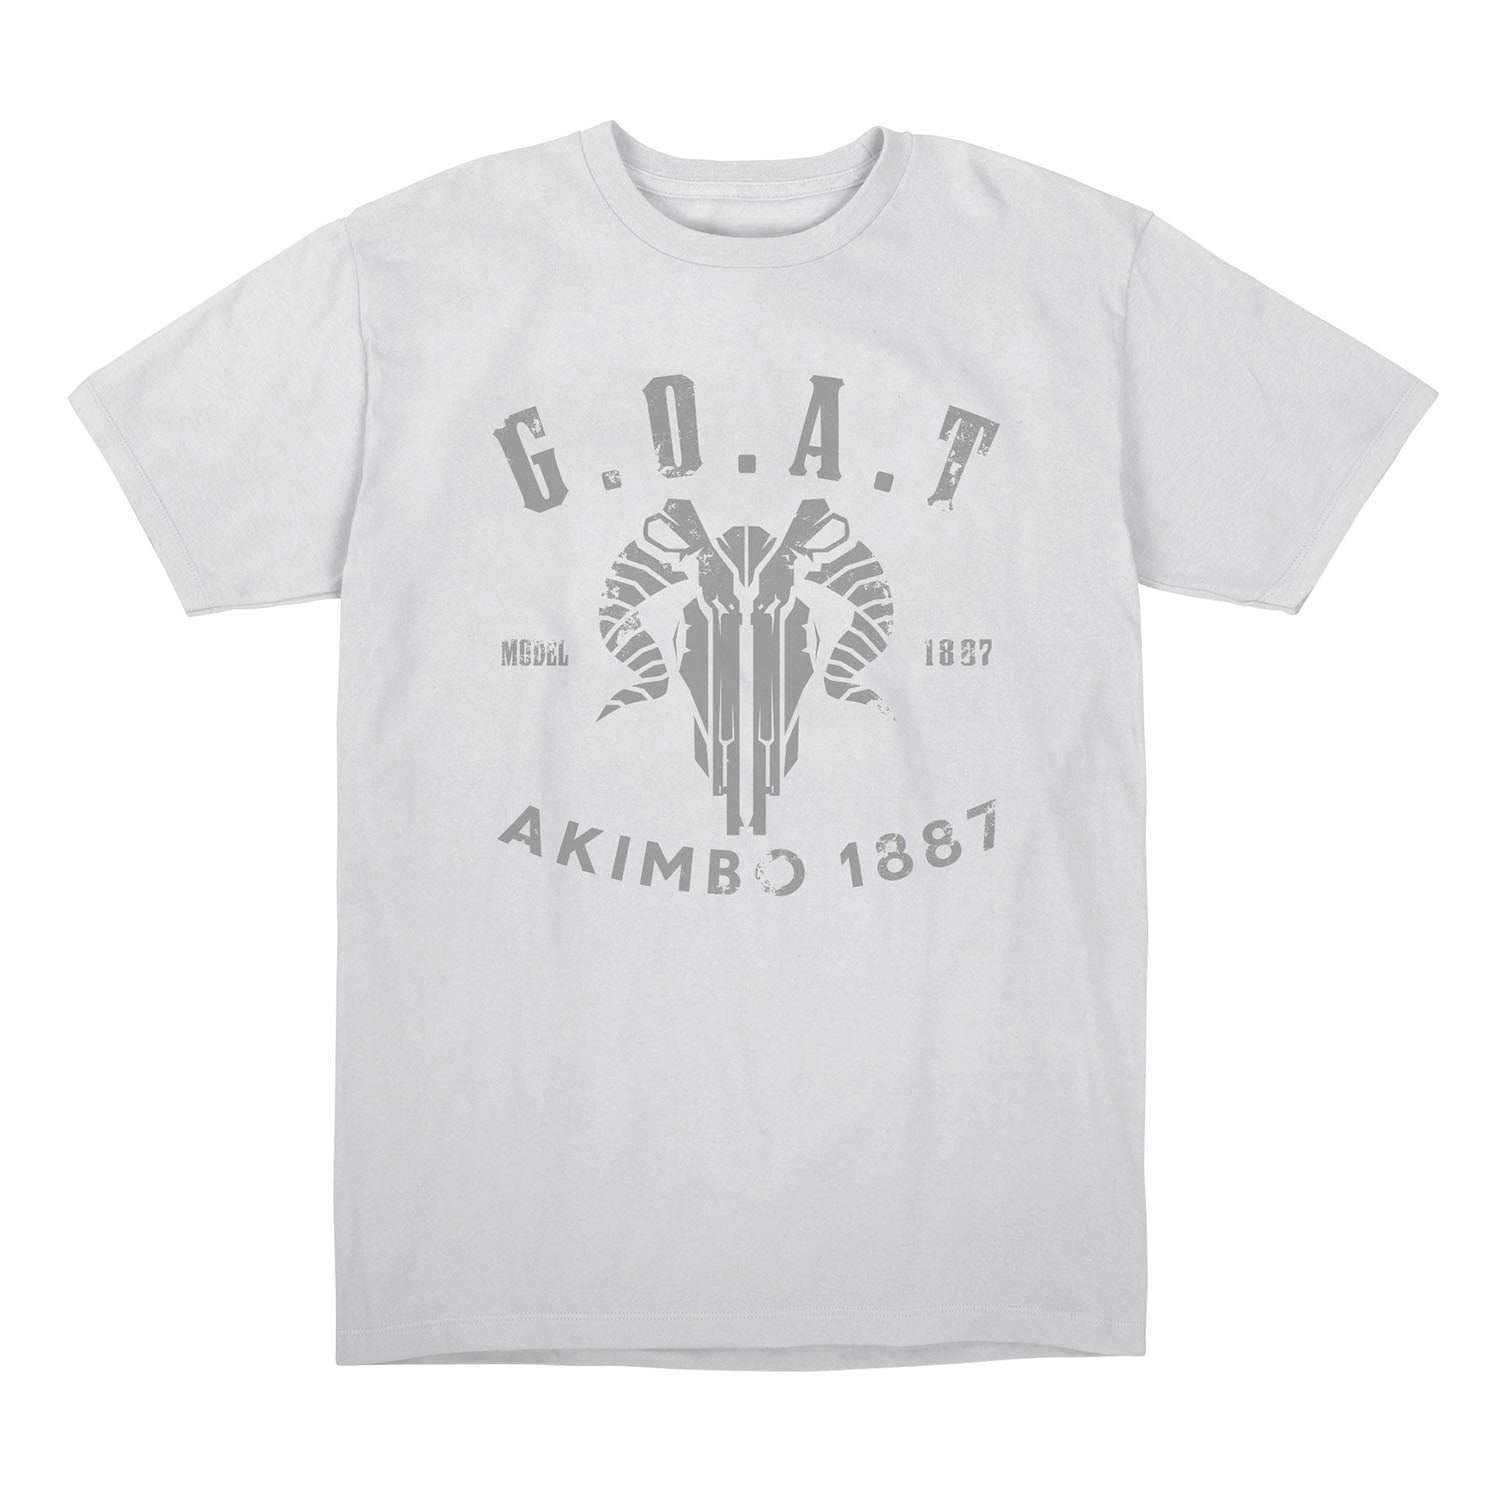 Call of Duty White Akimbo 1887 T-Shirt - Front View